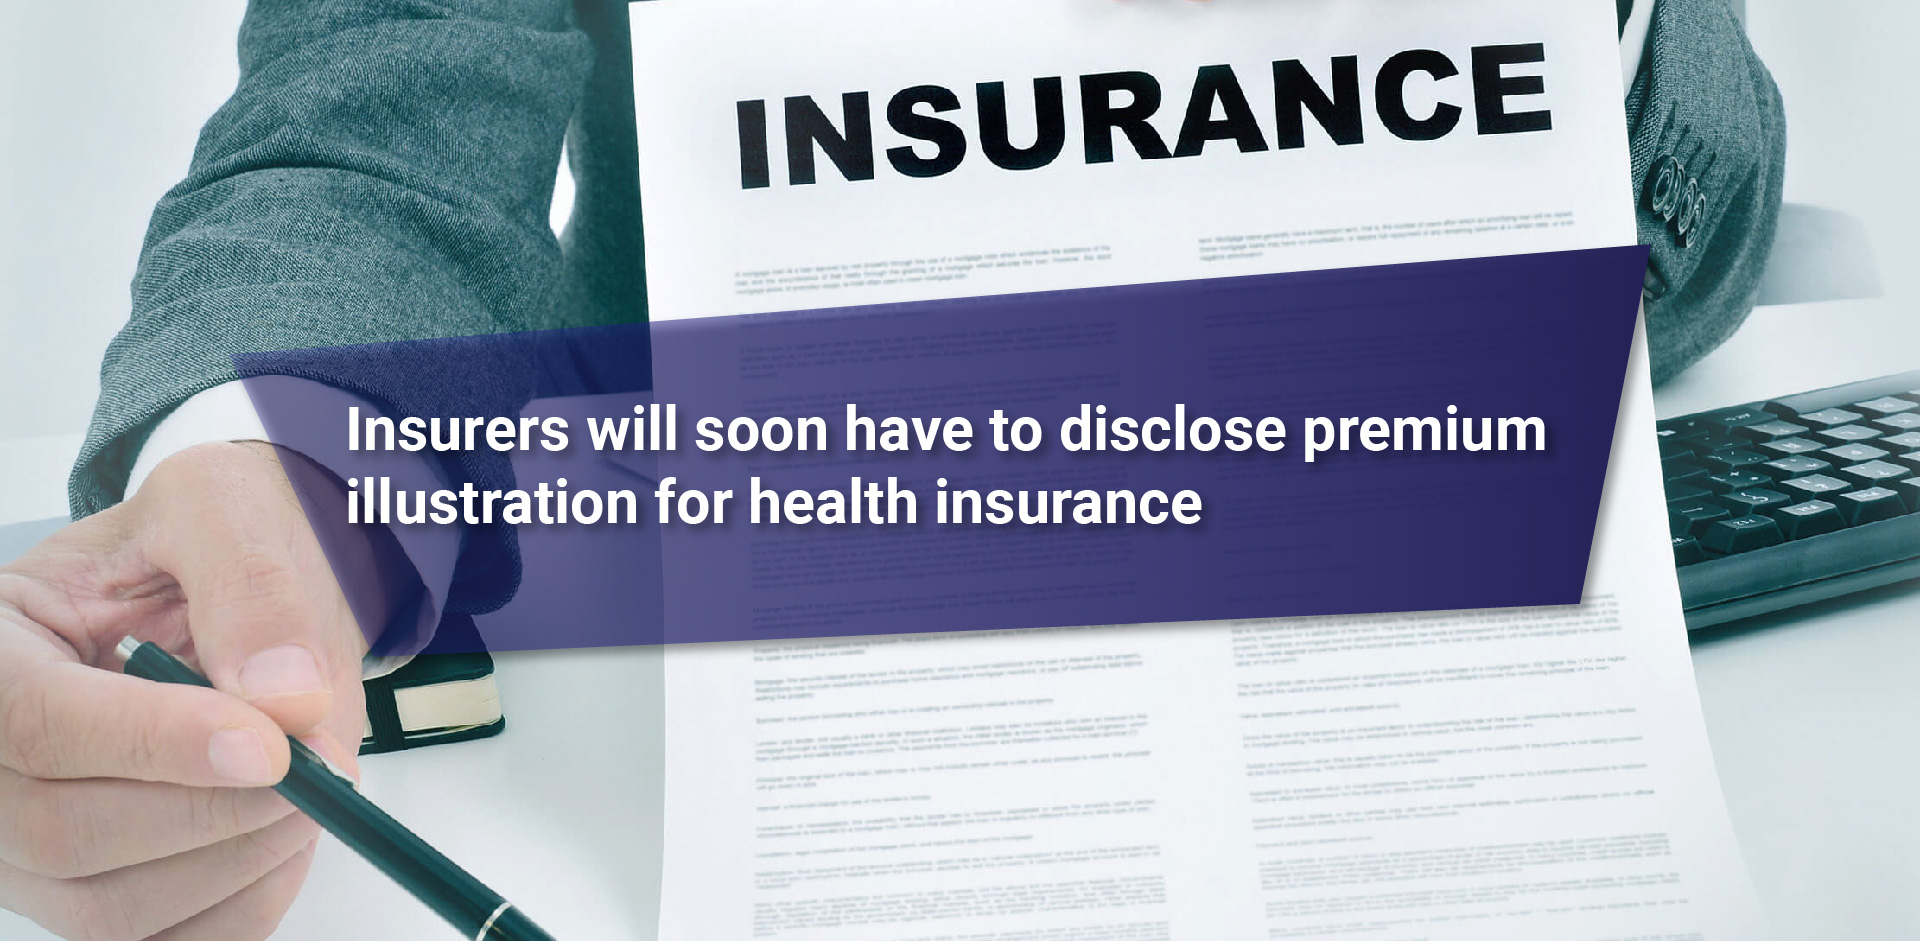 Insurers will soon have to disclose premium illustration for health insurance